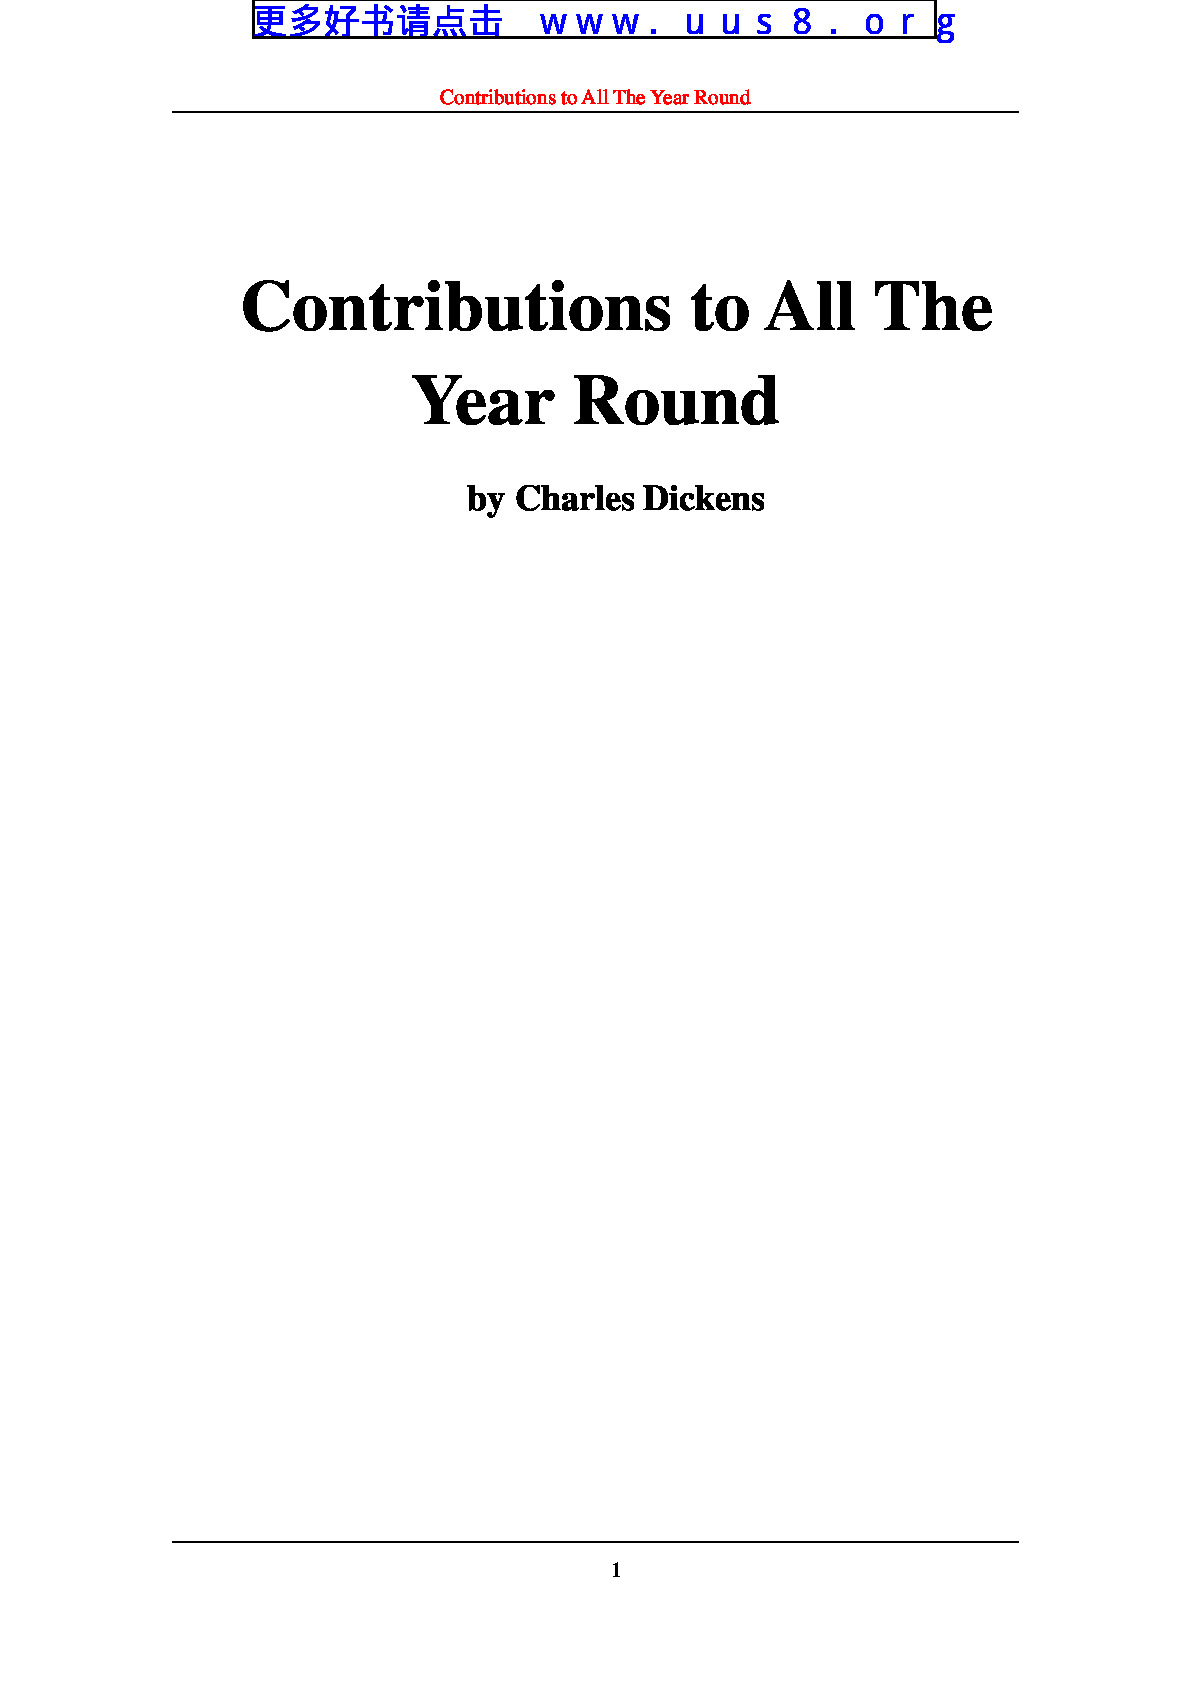 Contributions_to-_All_The_Year_Round(一年到头)